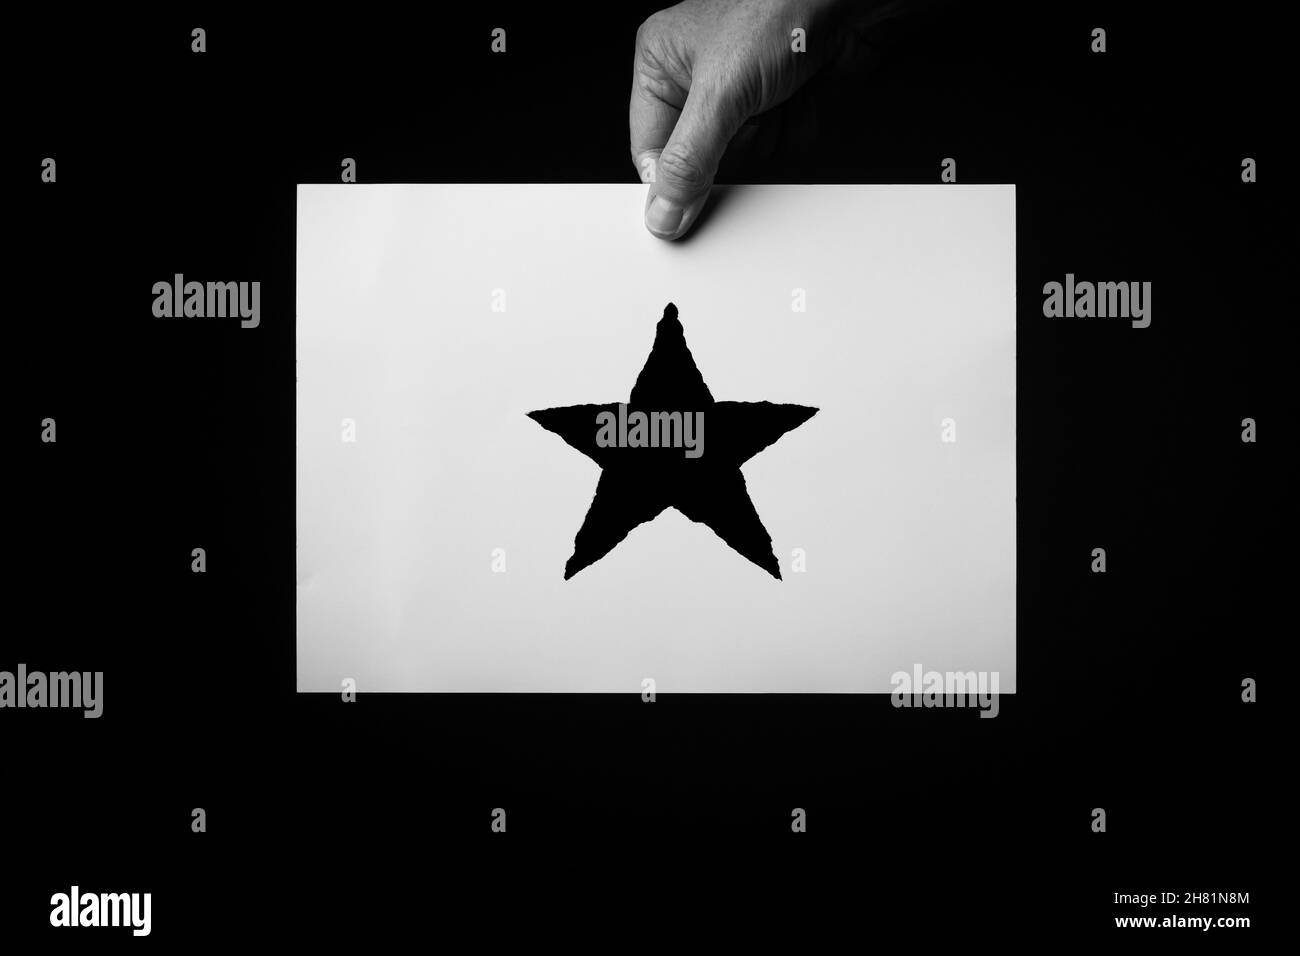 B+W image of male hand holding sheet of paper with christmas star symbol against black background. Stock Photo